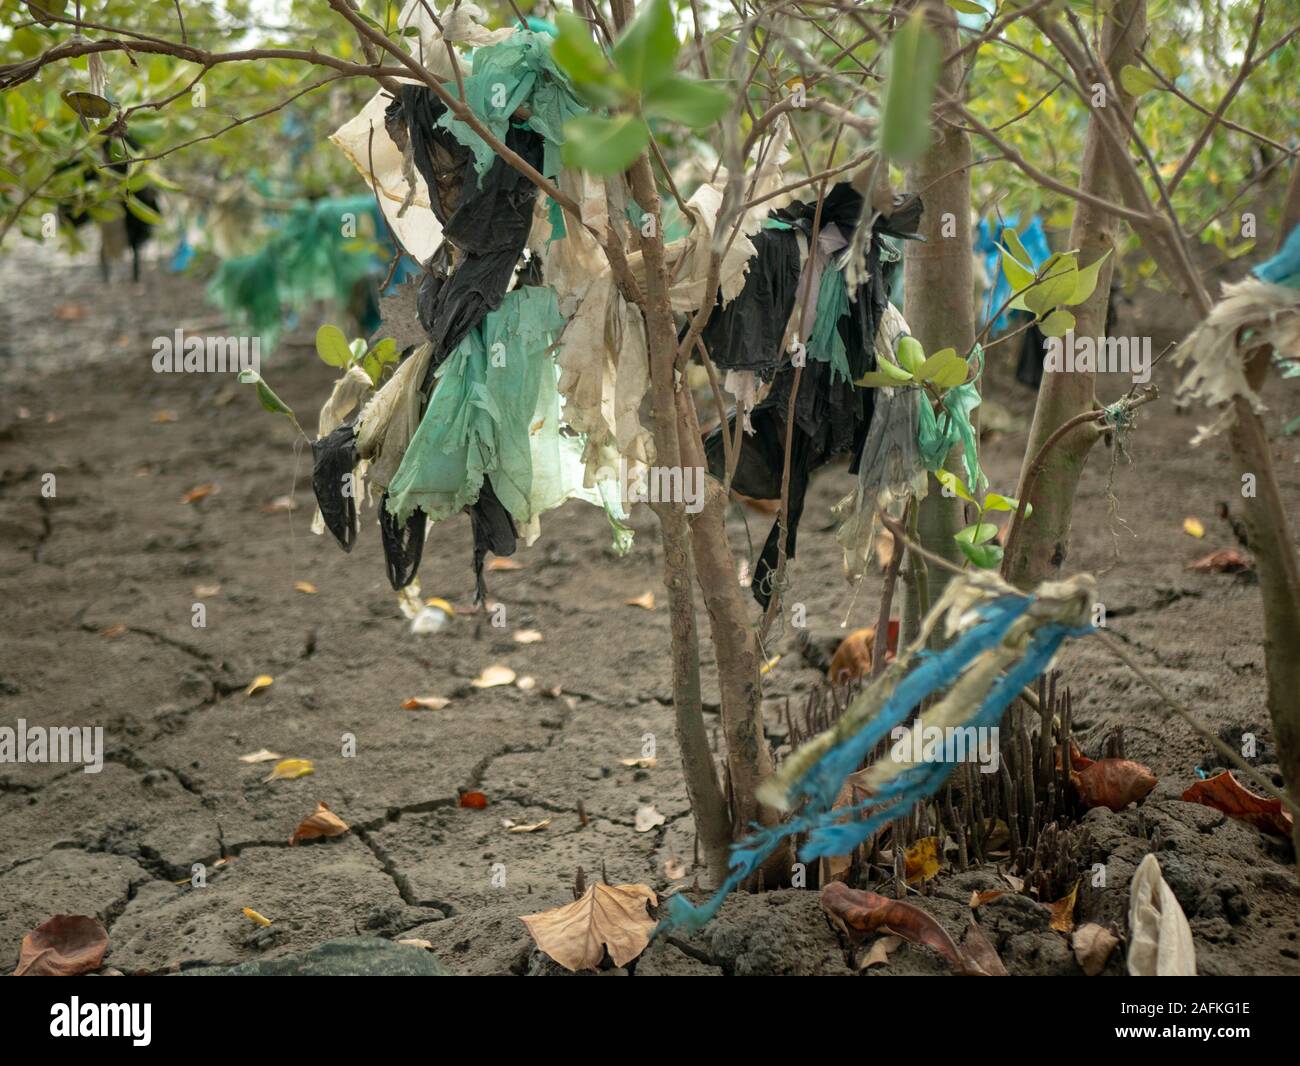 cleaning up forests from plastic pollution, garbage bag under tree, no  people 21509752 Stock Photo at Vecteezy